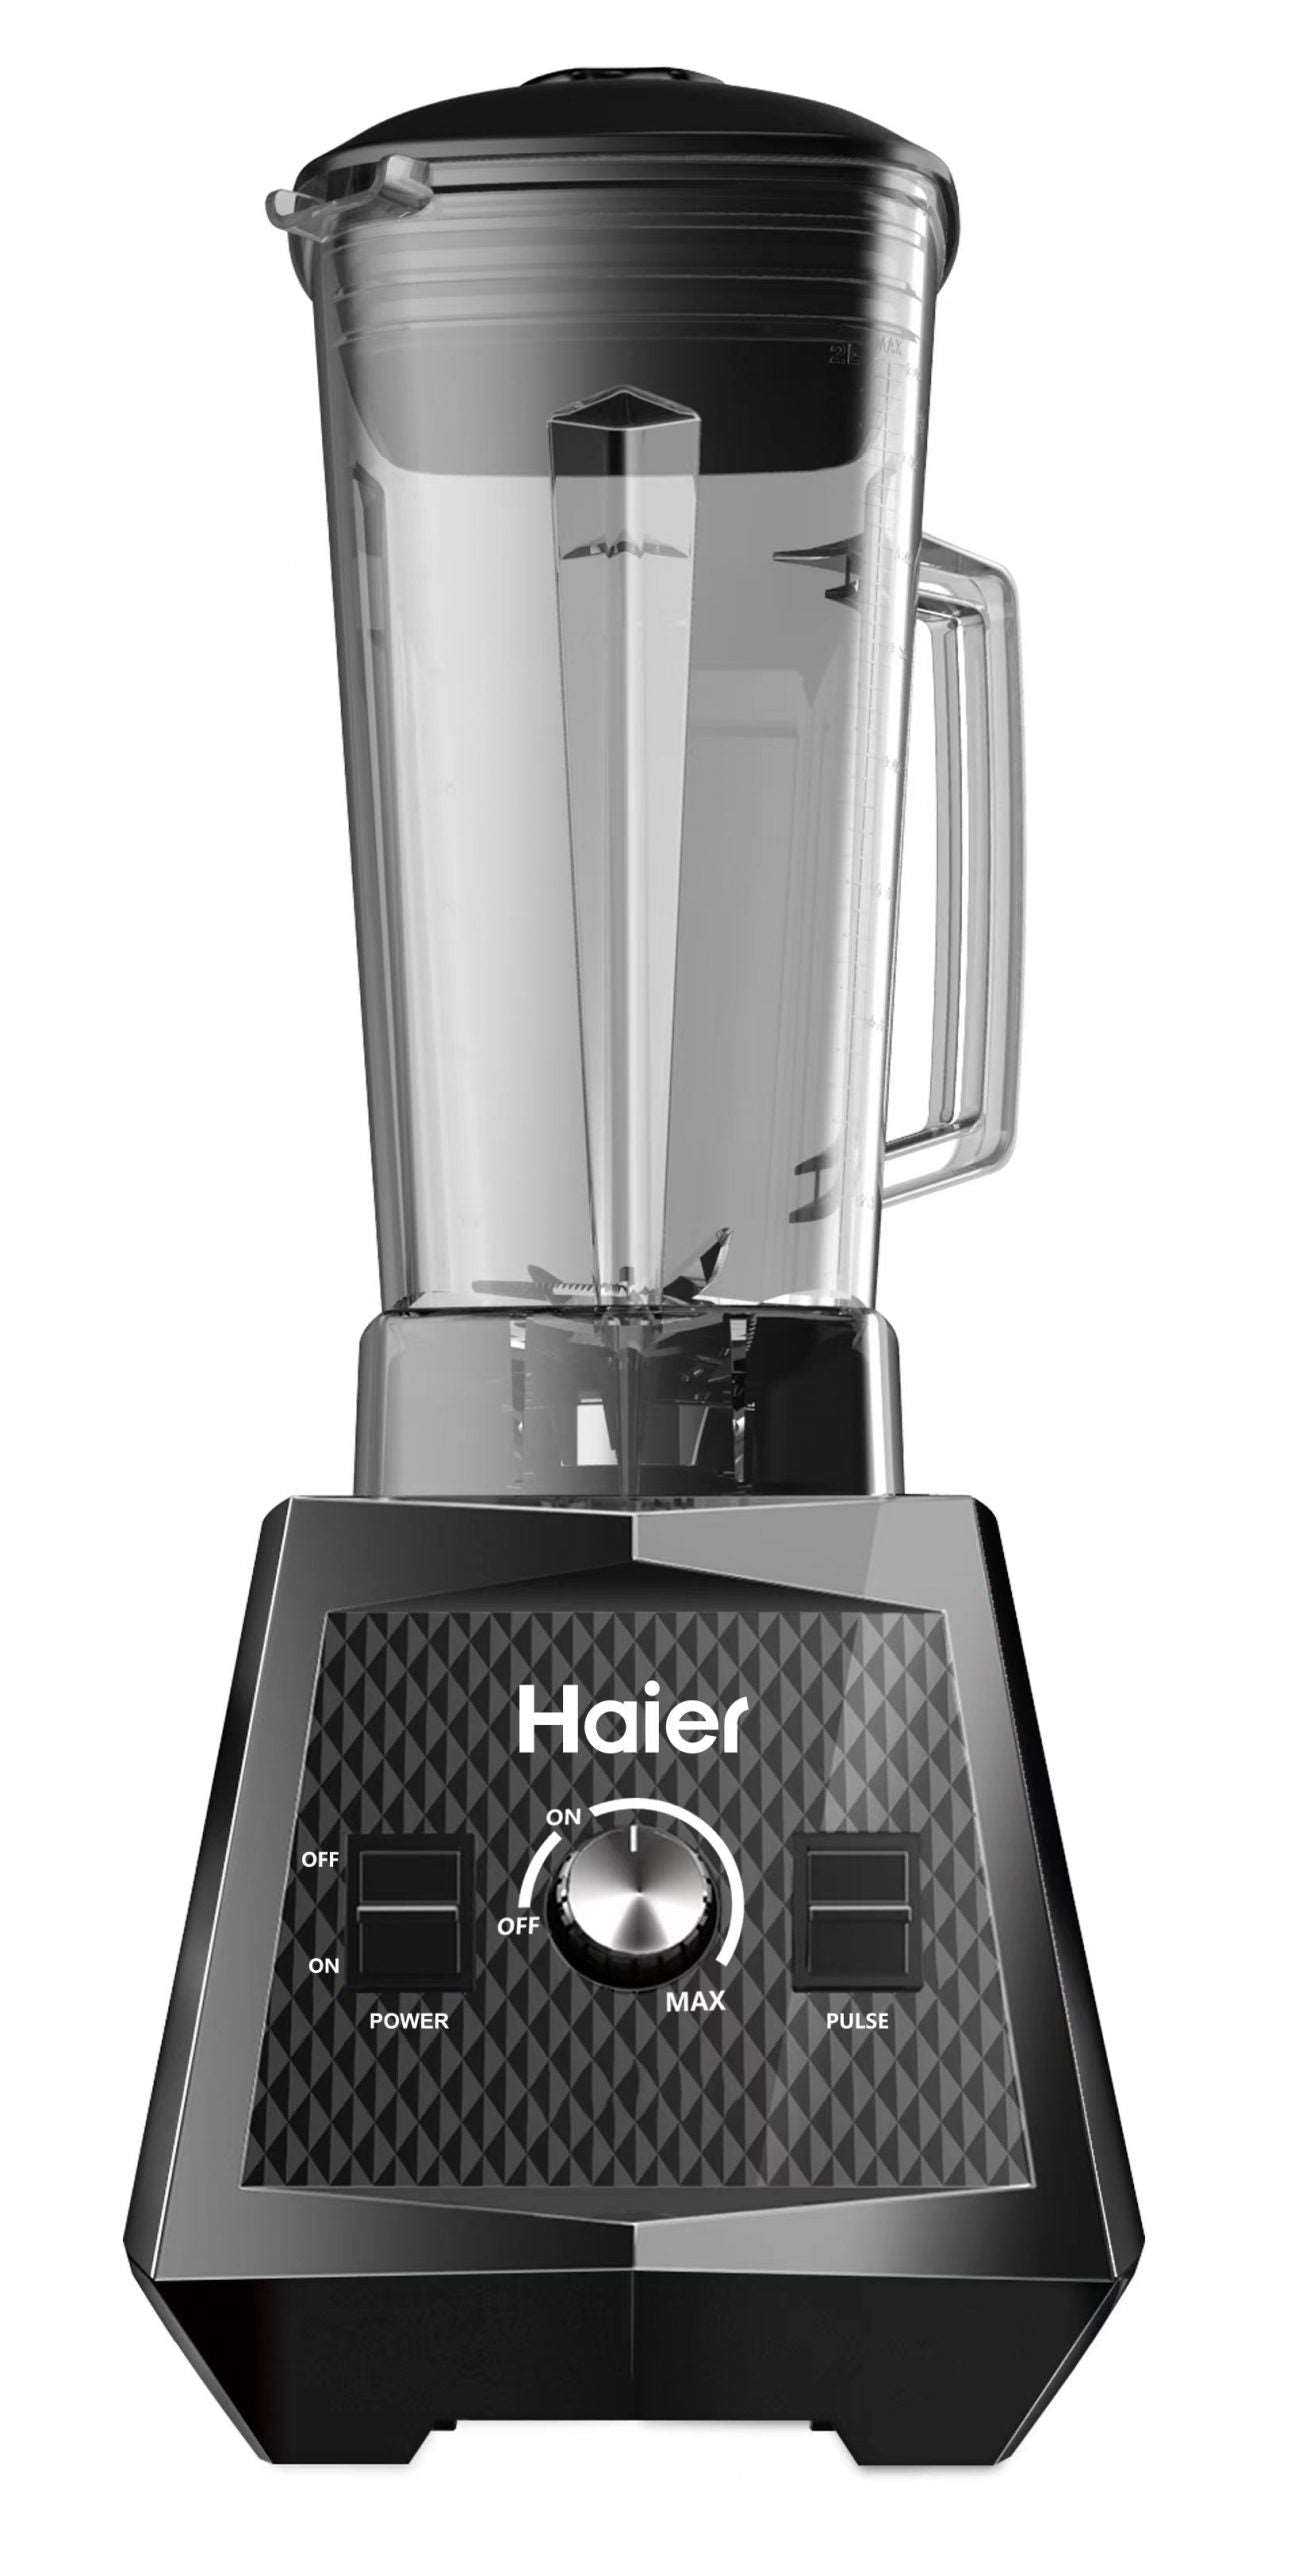 Haier Blender with 1500 watts of power